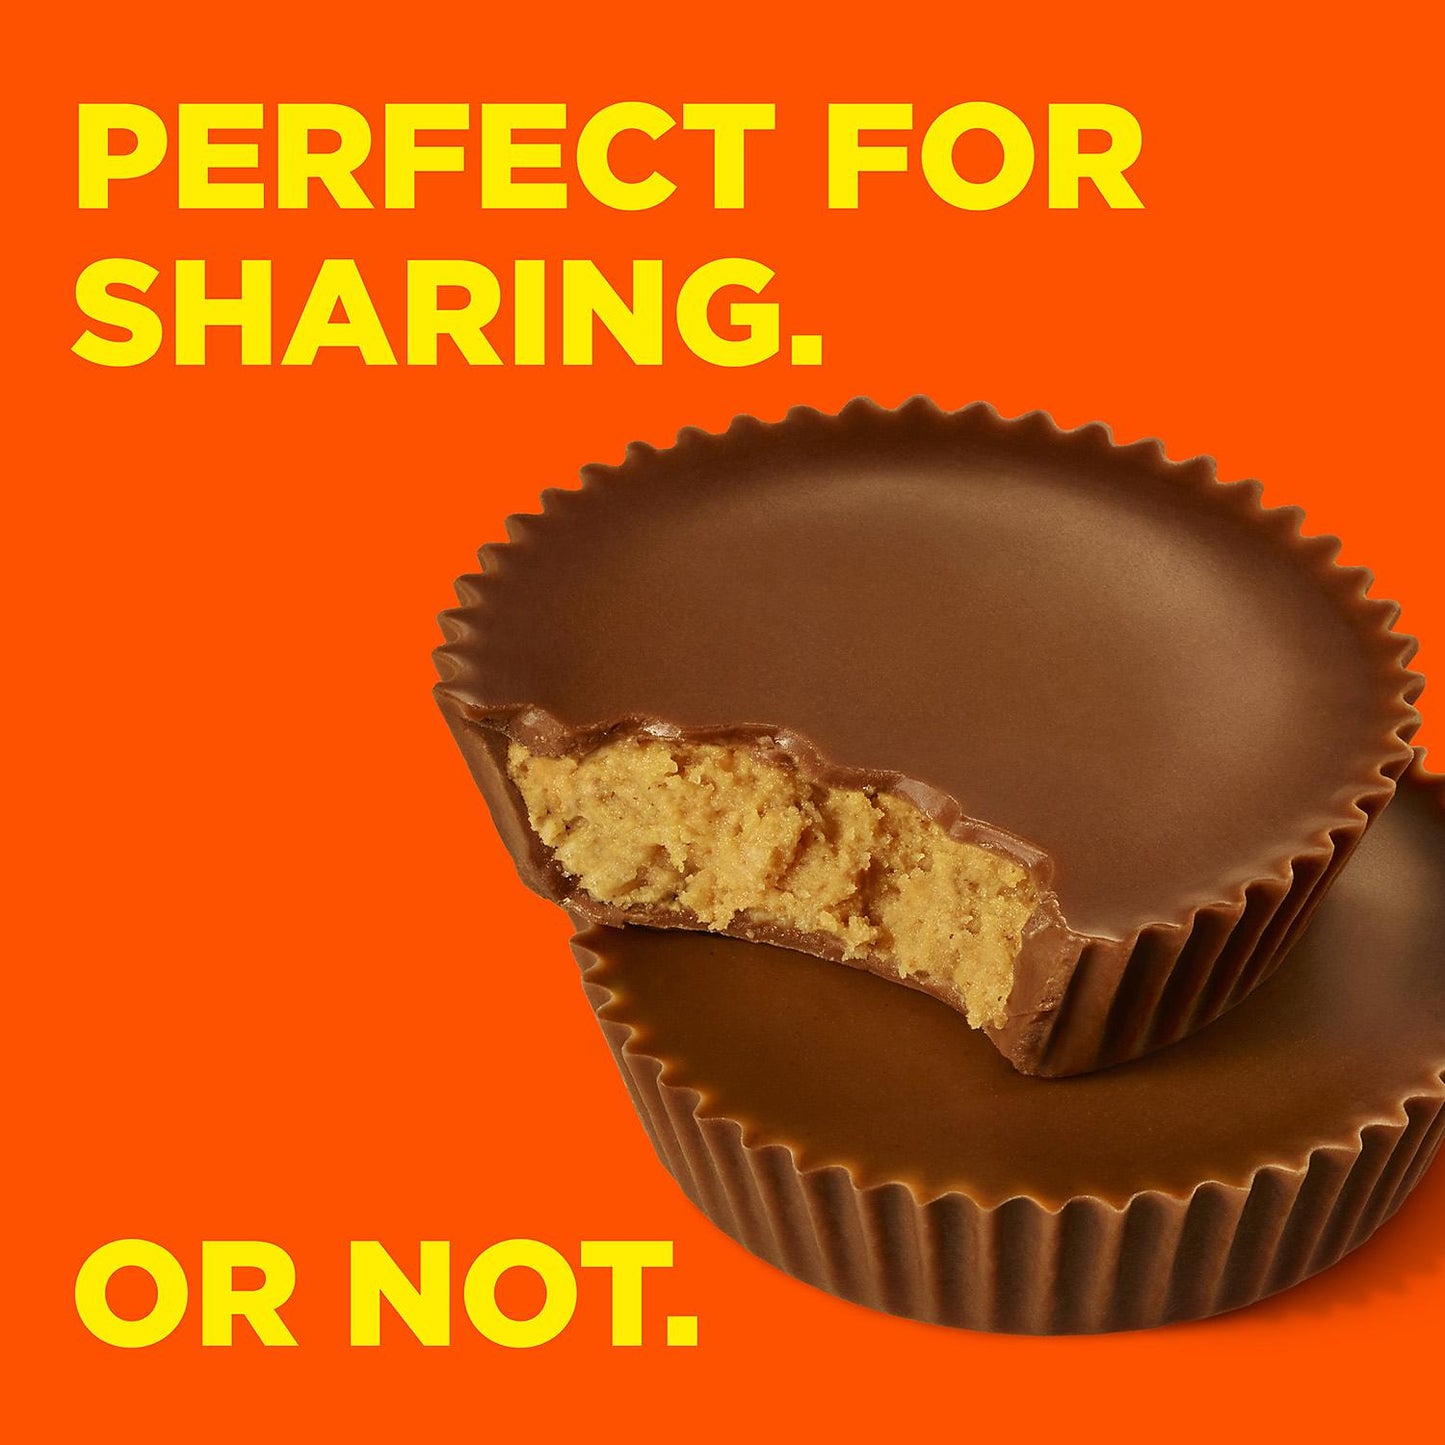 Reese's Miniatures Peanut Butter Cups (38 oz.)